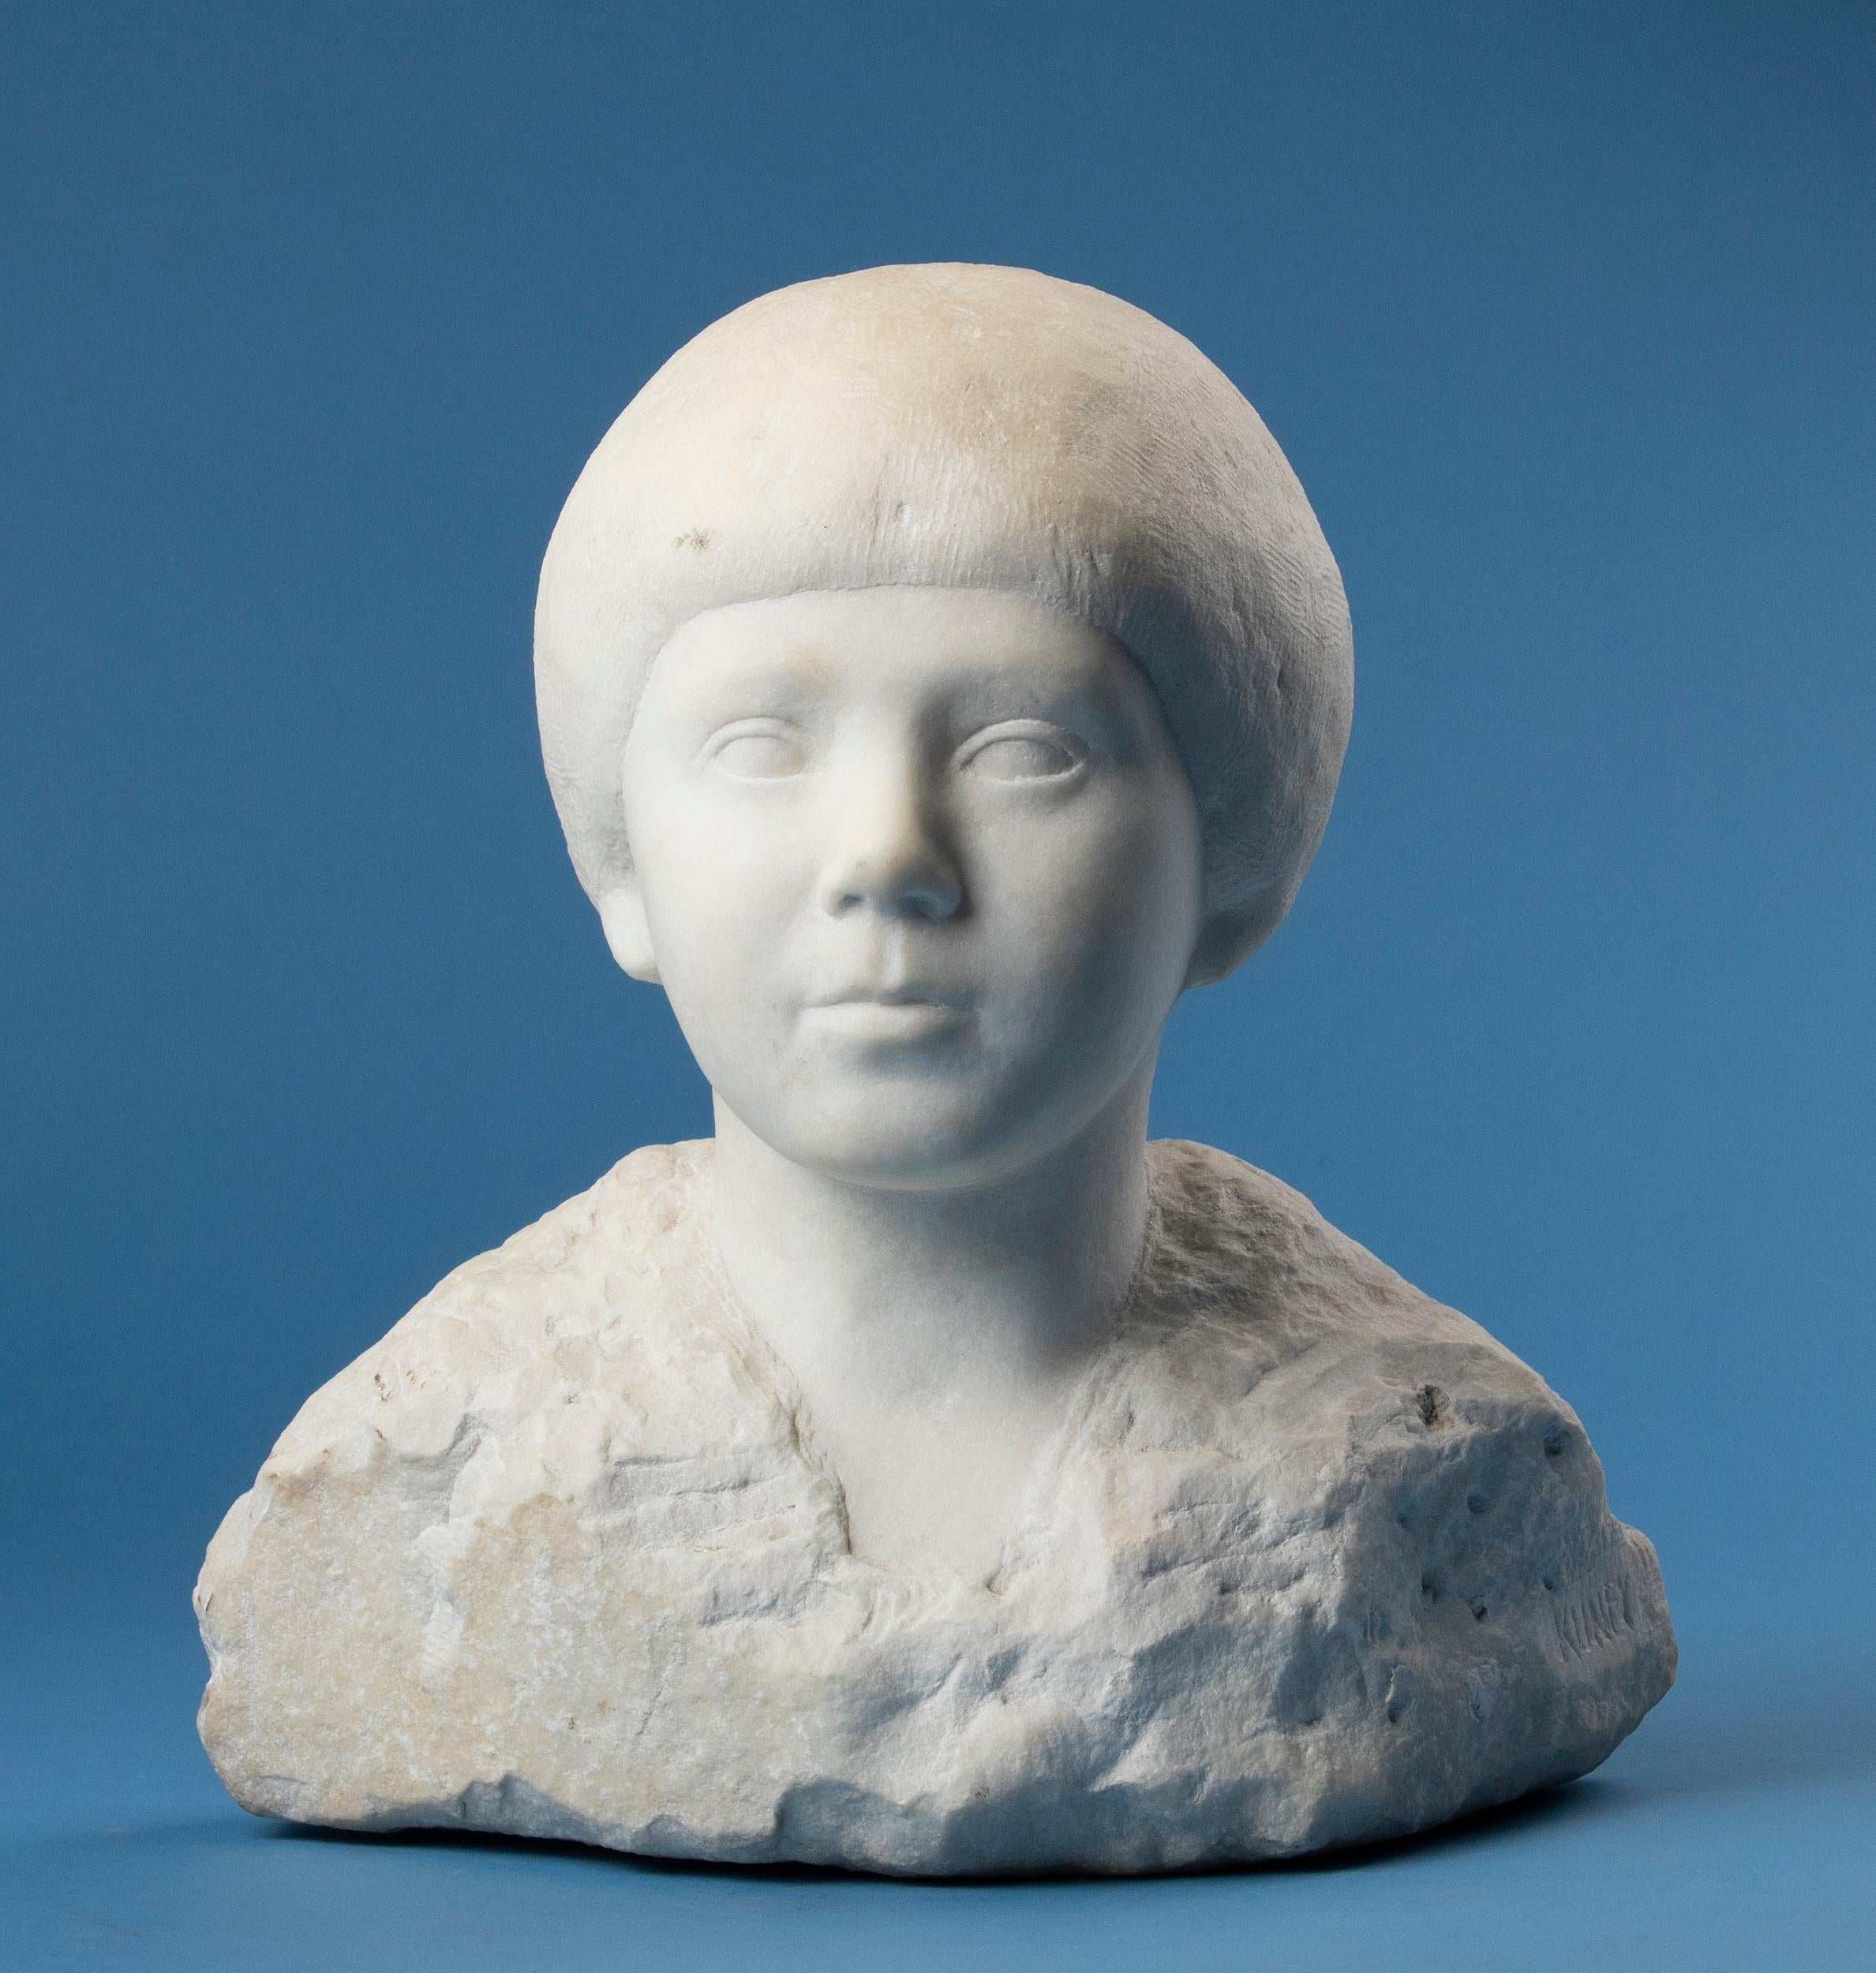 Beautiful marble bust of a young child.
This statue is hand cut from Carrara marble.
This statue dates from circa 1930, from the modernist Art Deco period. The beautiful, smooth face of the child contrasts nicely with the rough, unfinished